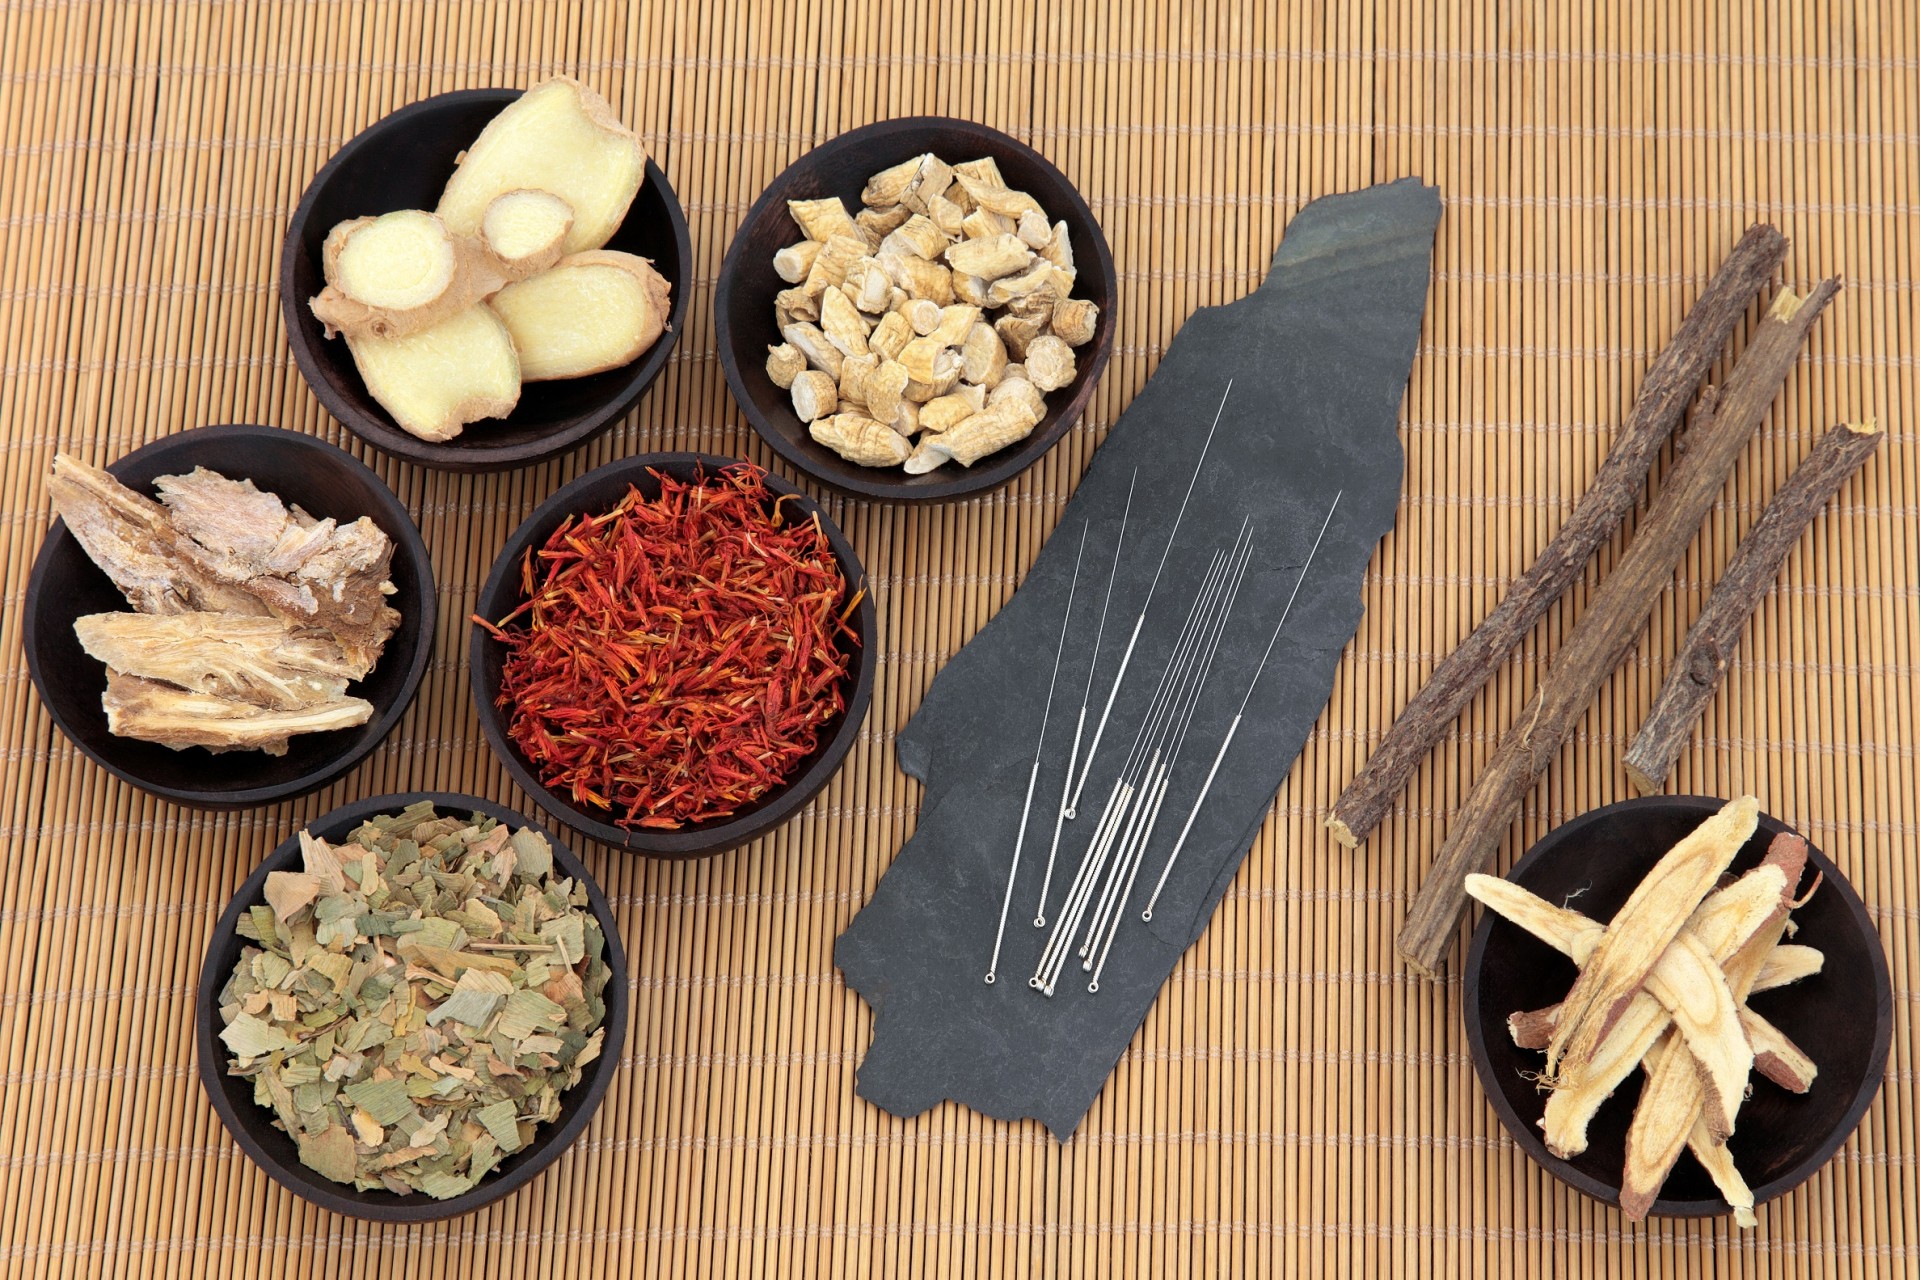 Acupuncture & Full Chinese Herbal Consultation